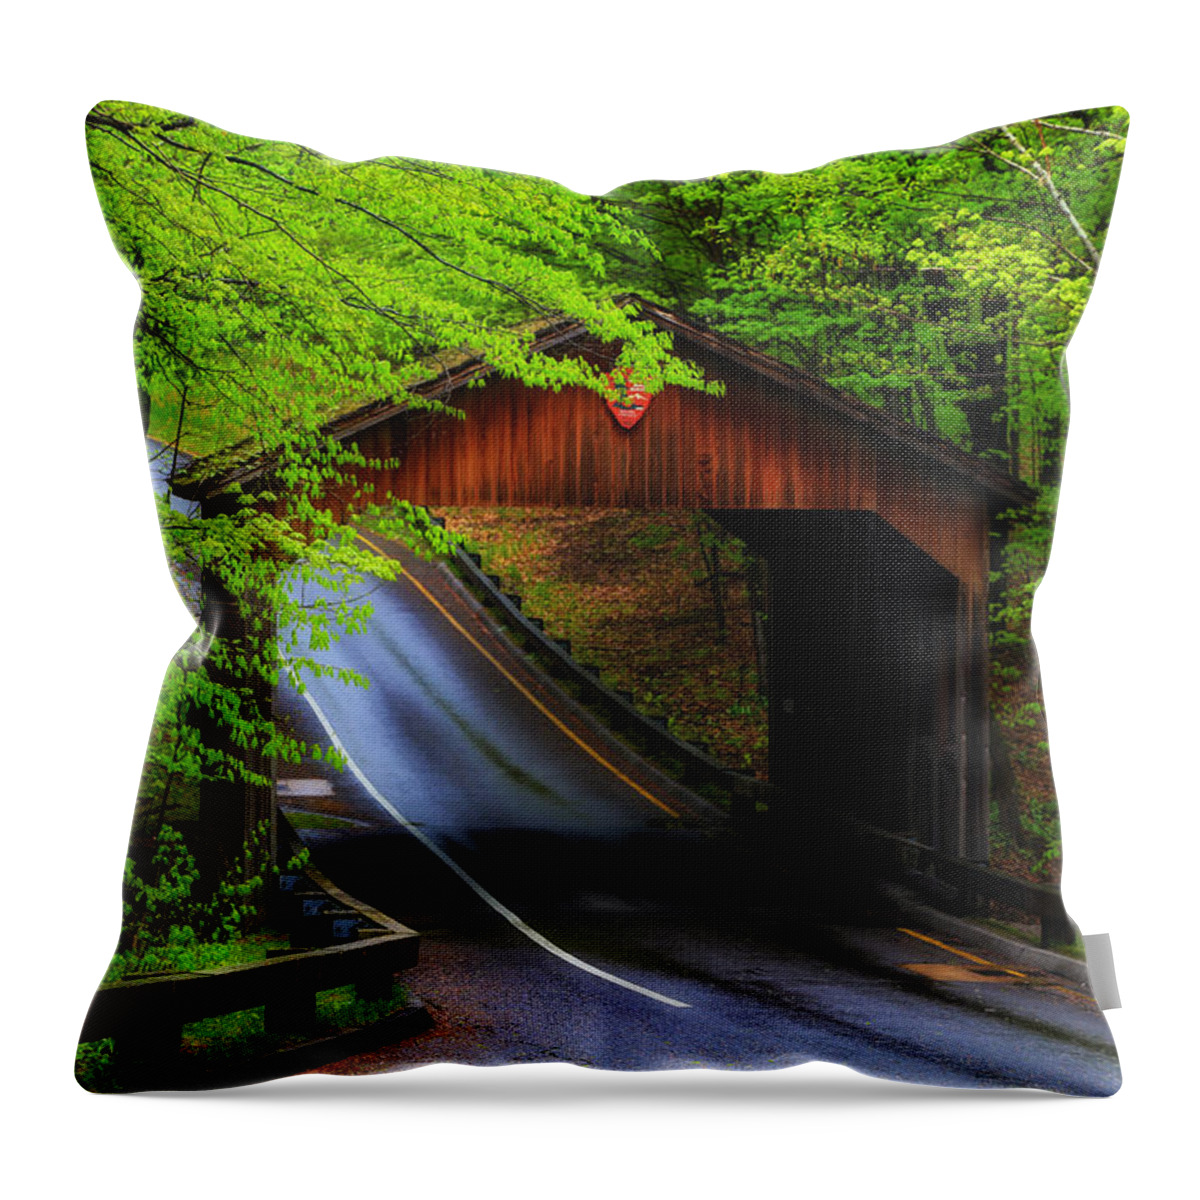 Covered Bridge Throw Pillow featuring the photograph Rainy Day Covered Bridge by Rachel Cohen